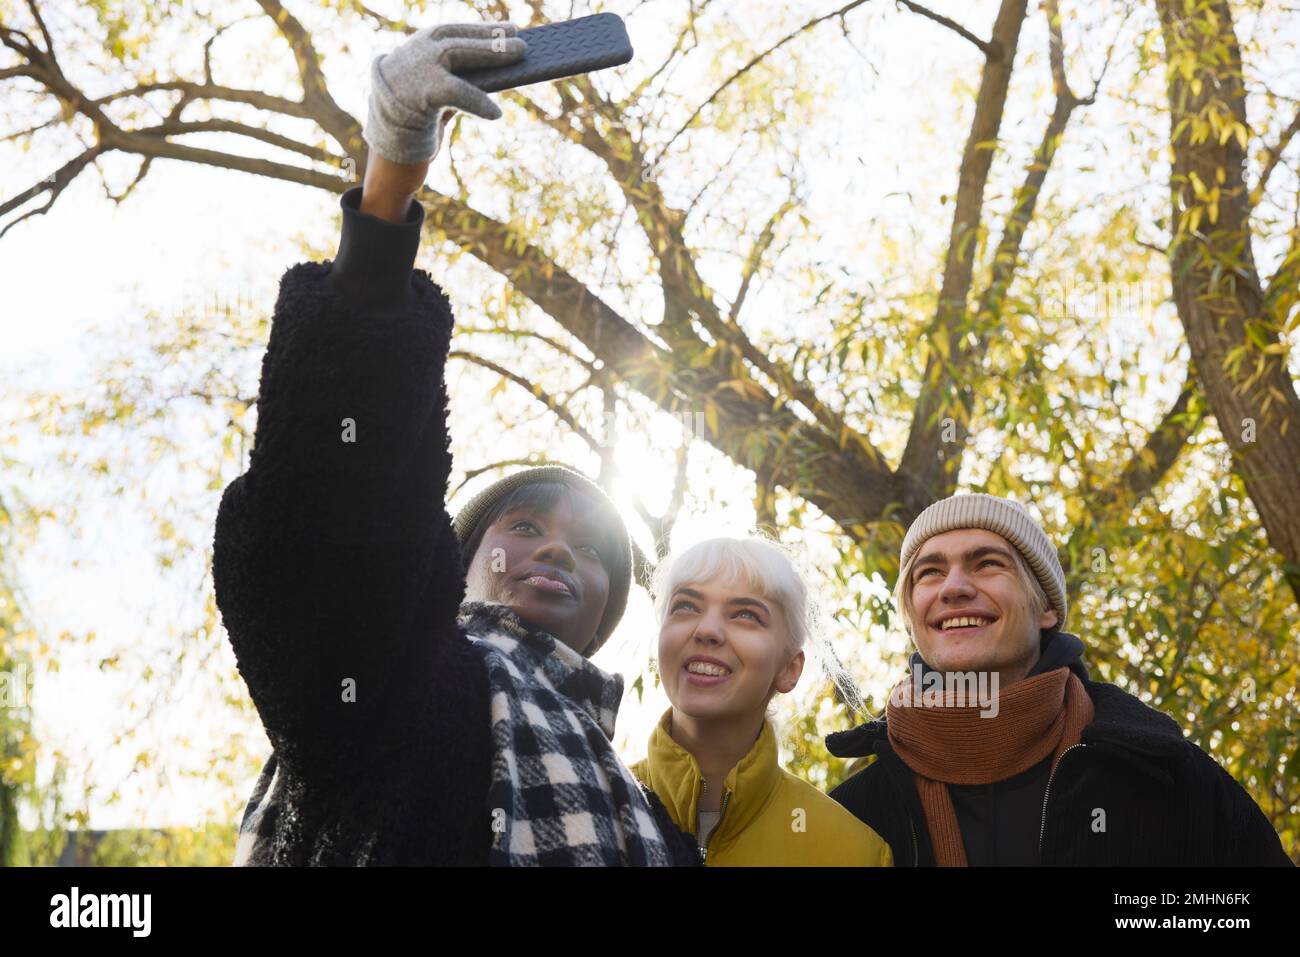 Smiling young friends taking selfie Stock Photo